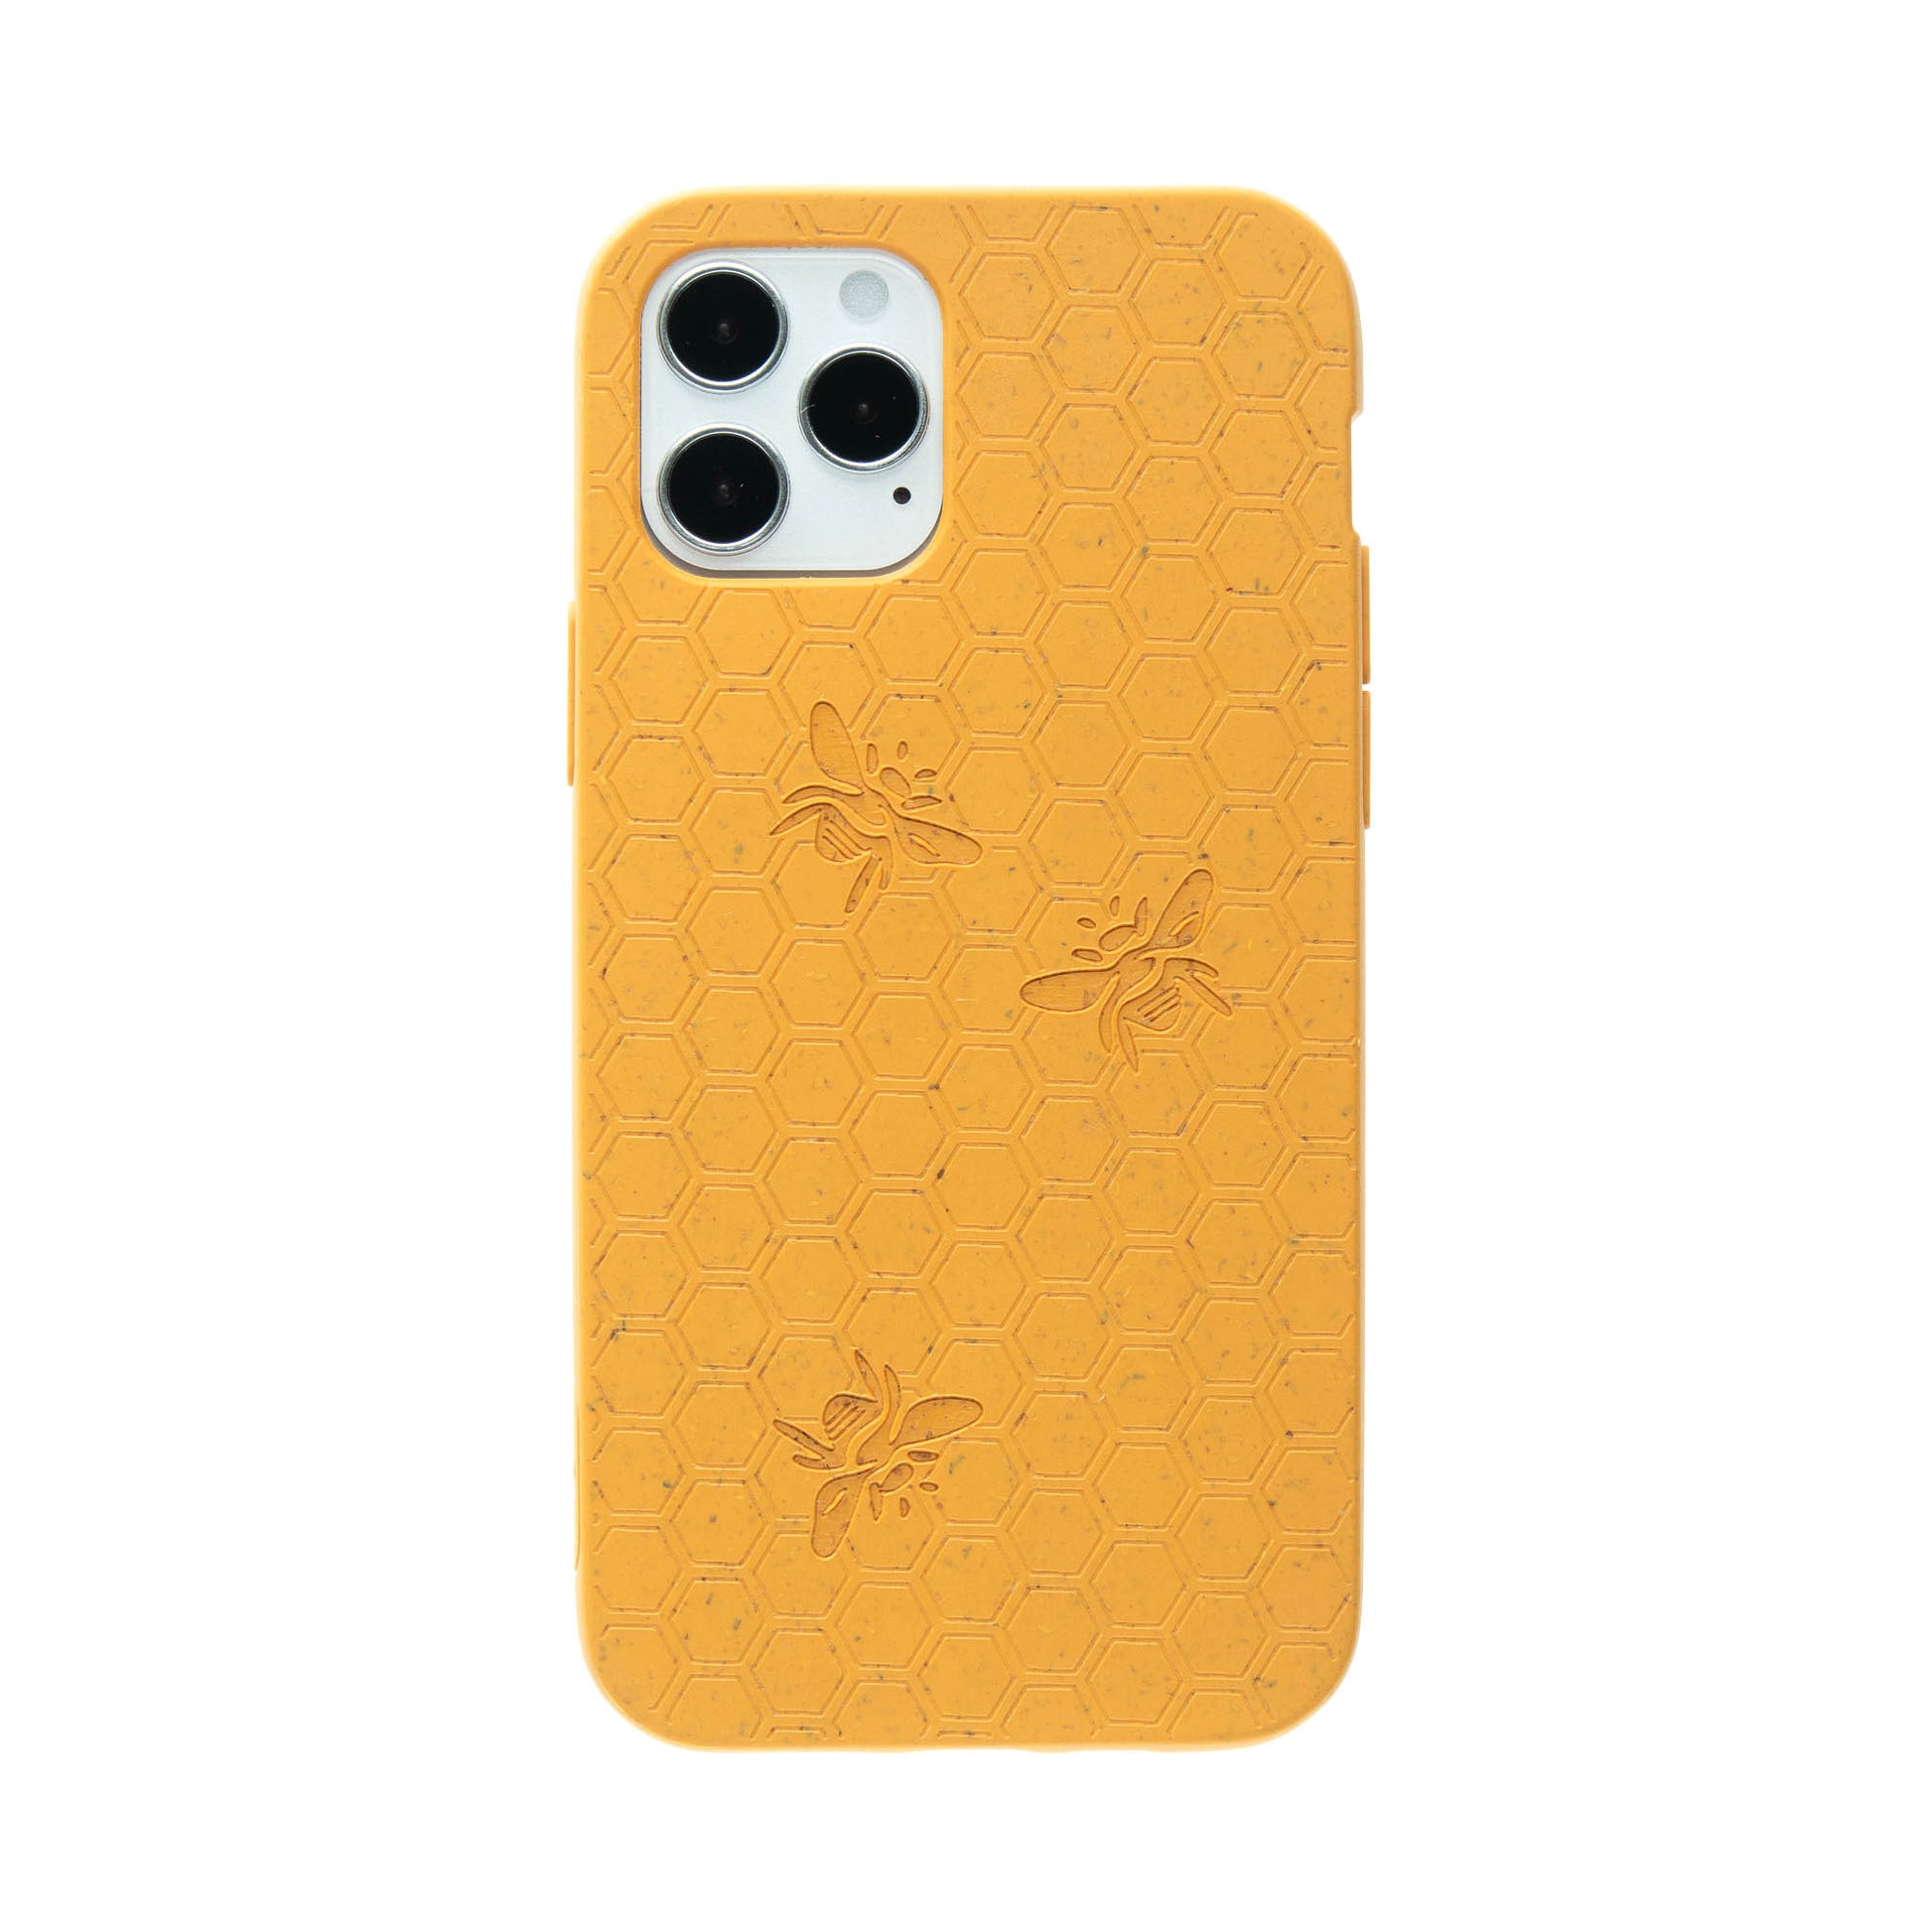 Honey bee, honeycomb engraved Pela phone case for the iPhone 12.